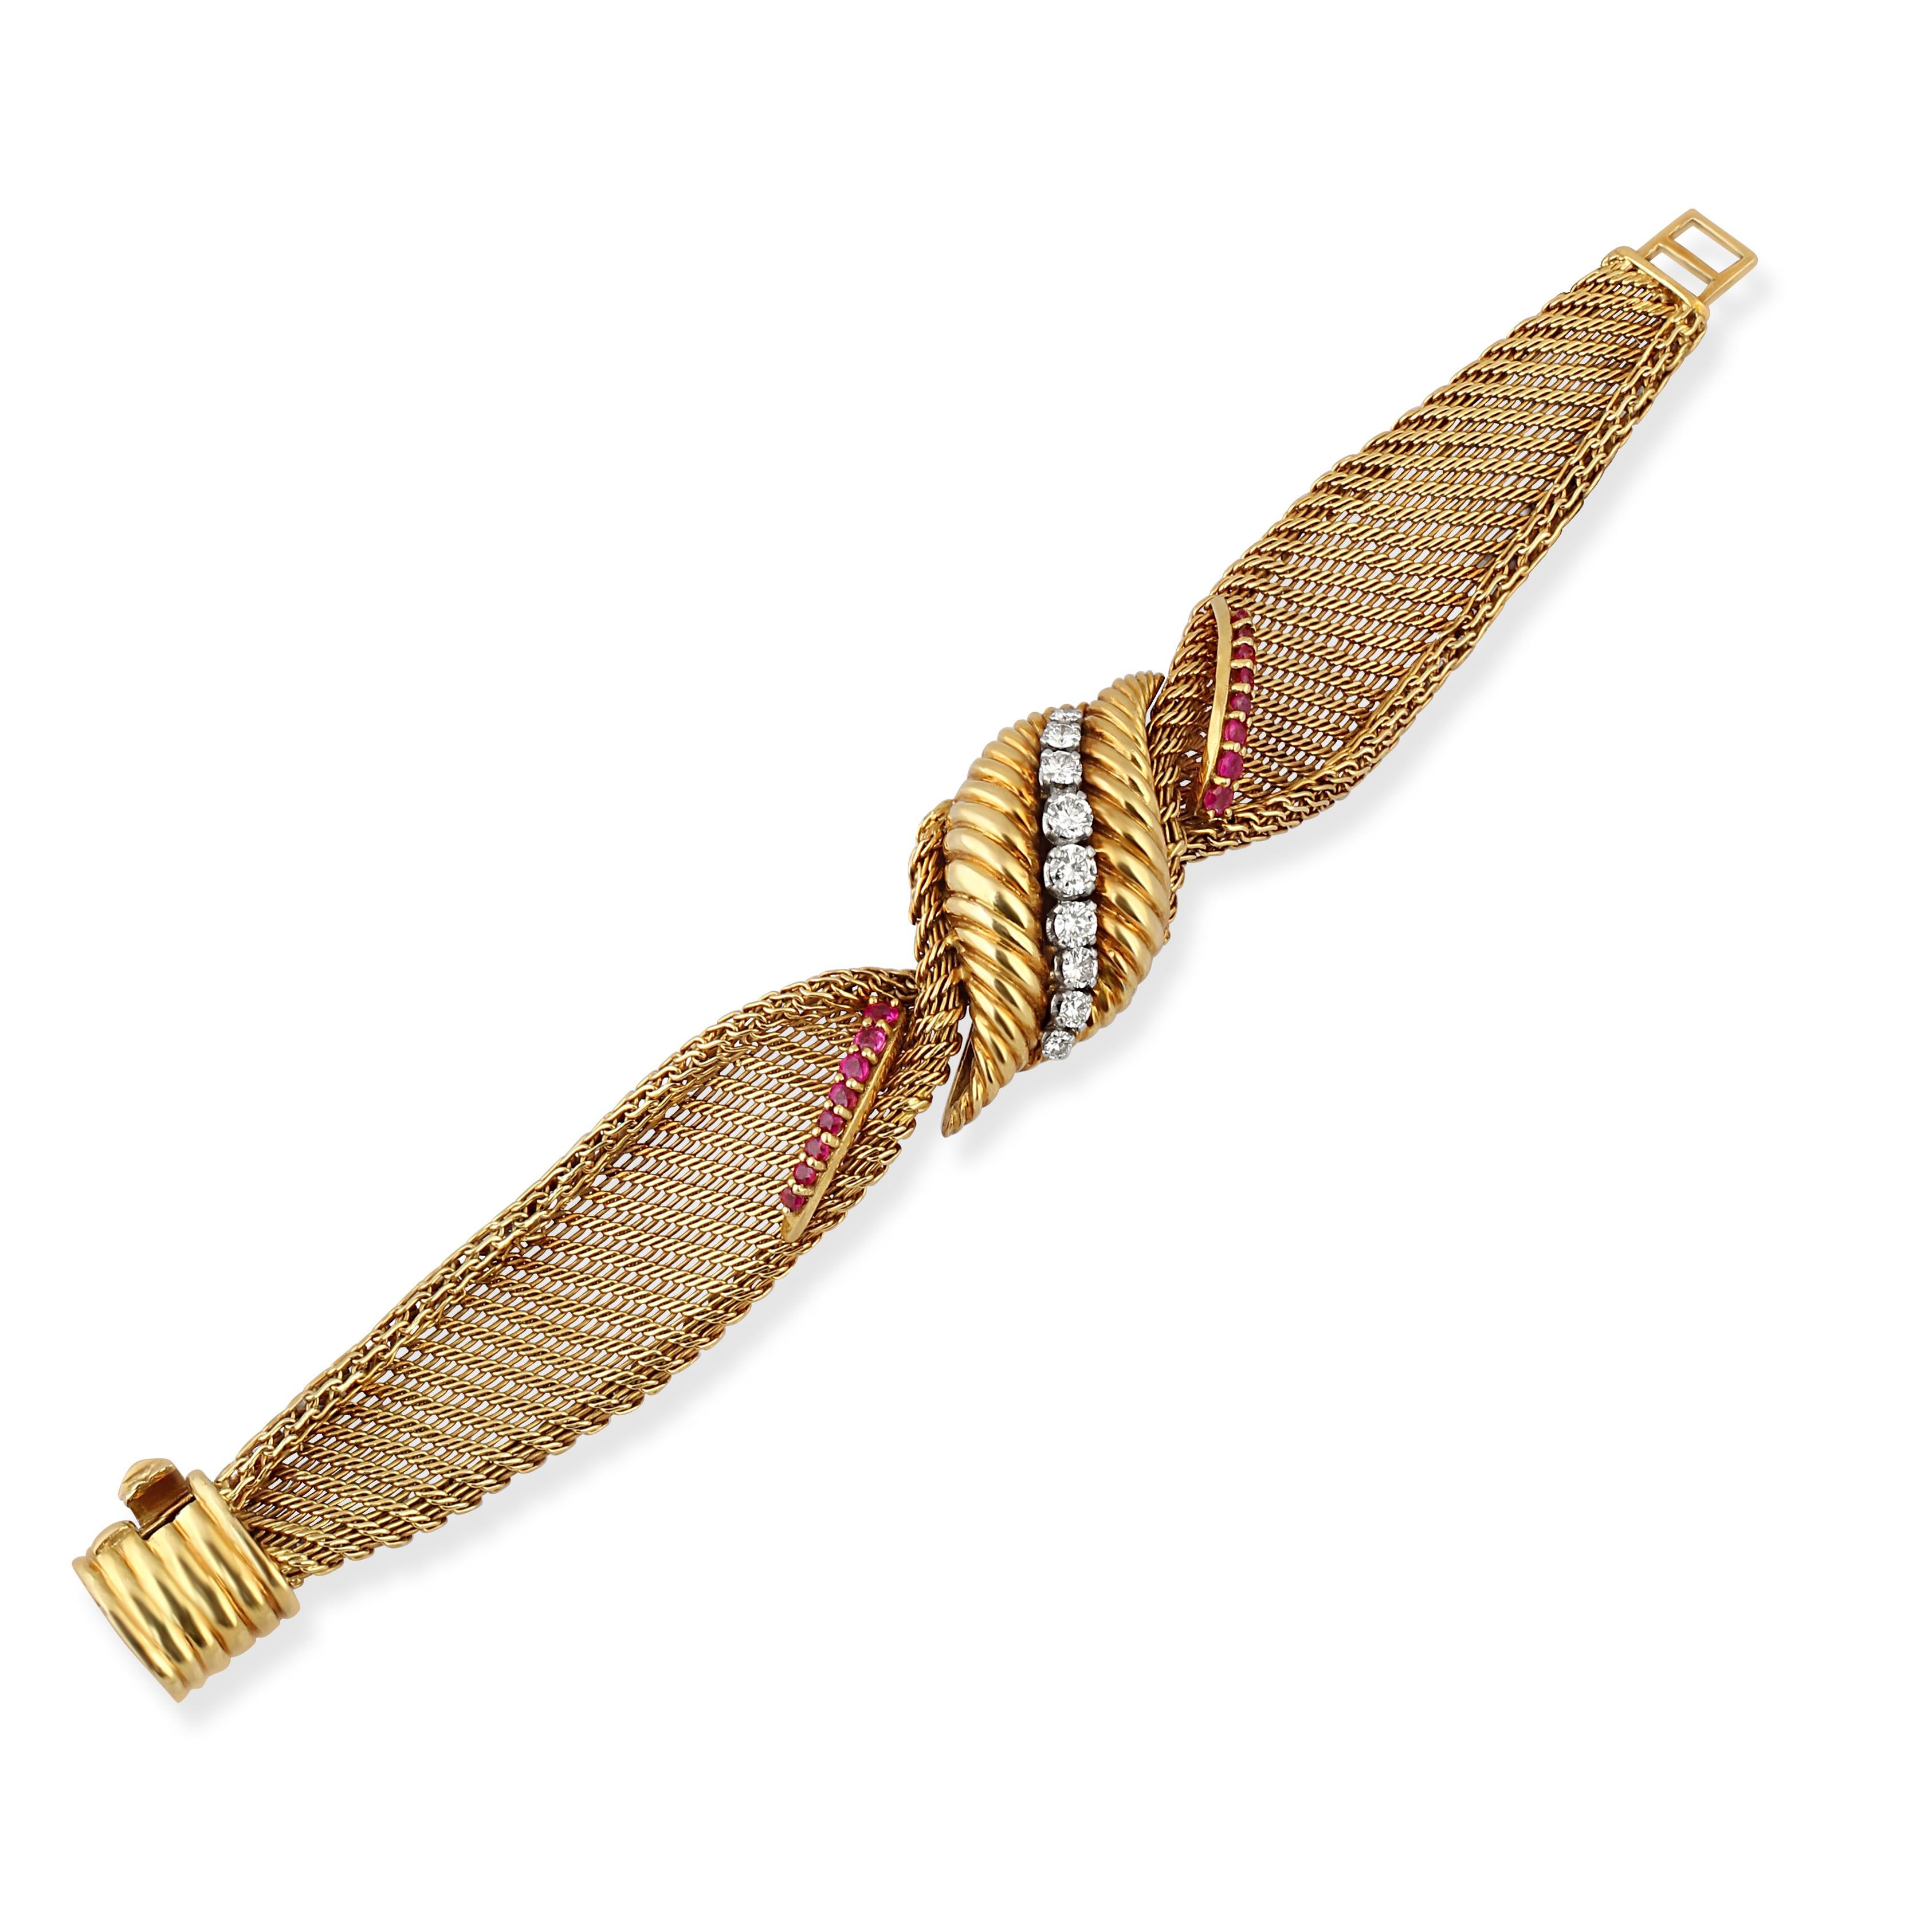 An 18k gold bracelet with a mesh design and twisted centrepiece set with circle-cut diamonds and rubies.

Length: 19cm
Weight: 59gr
